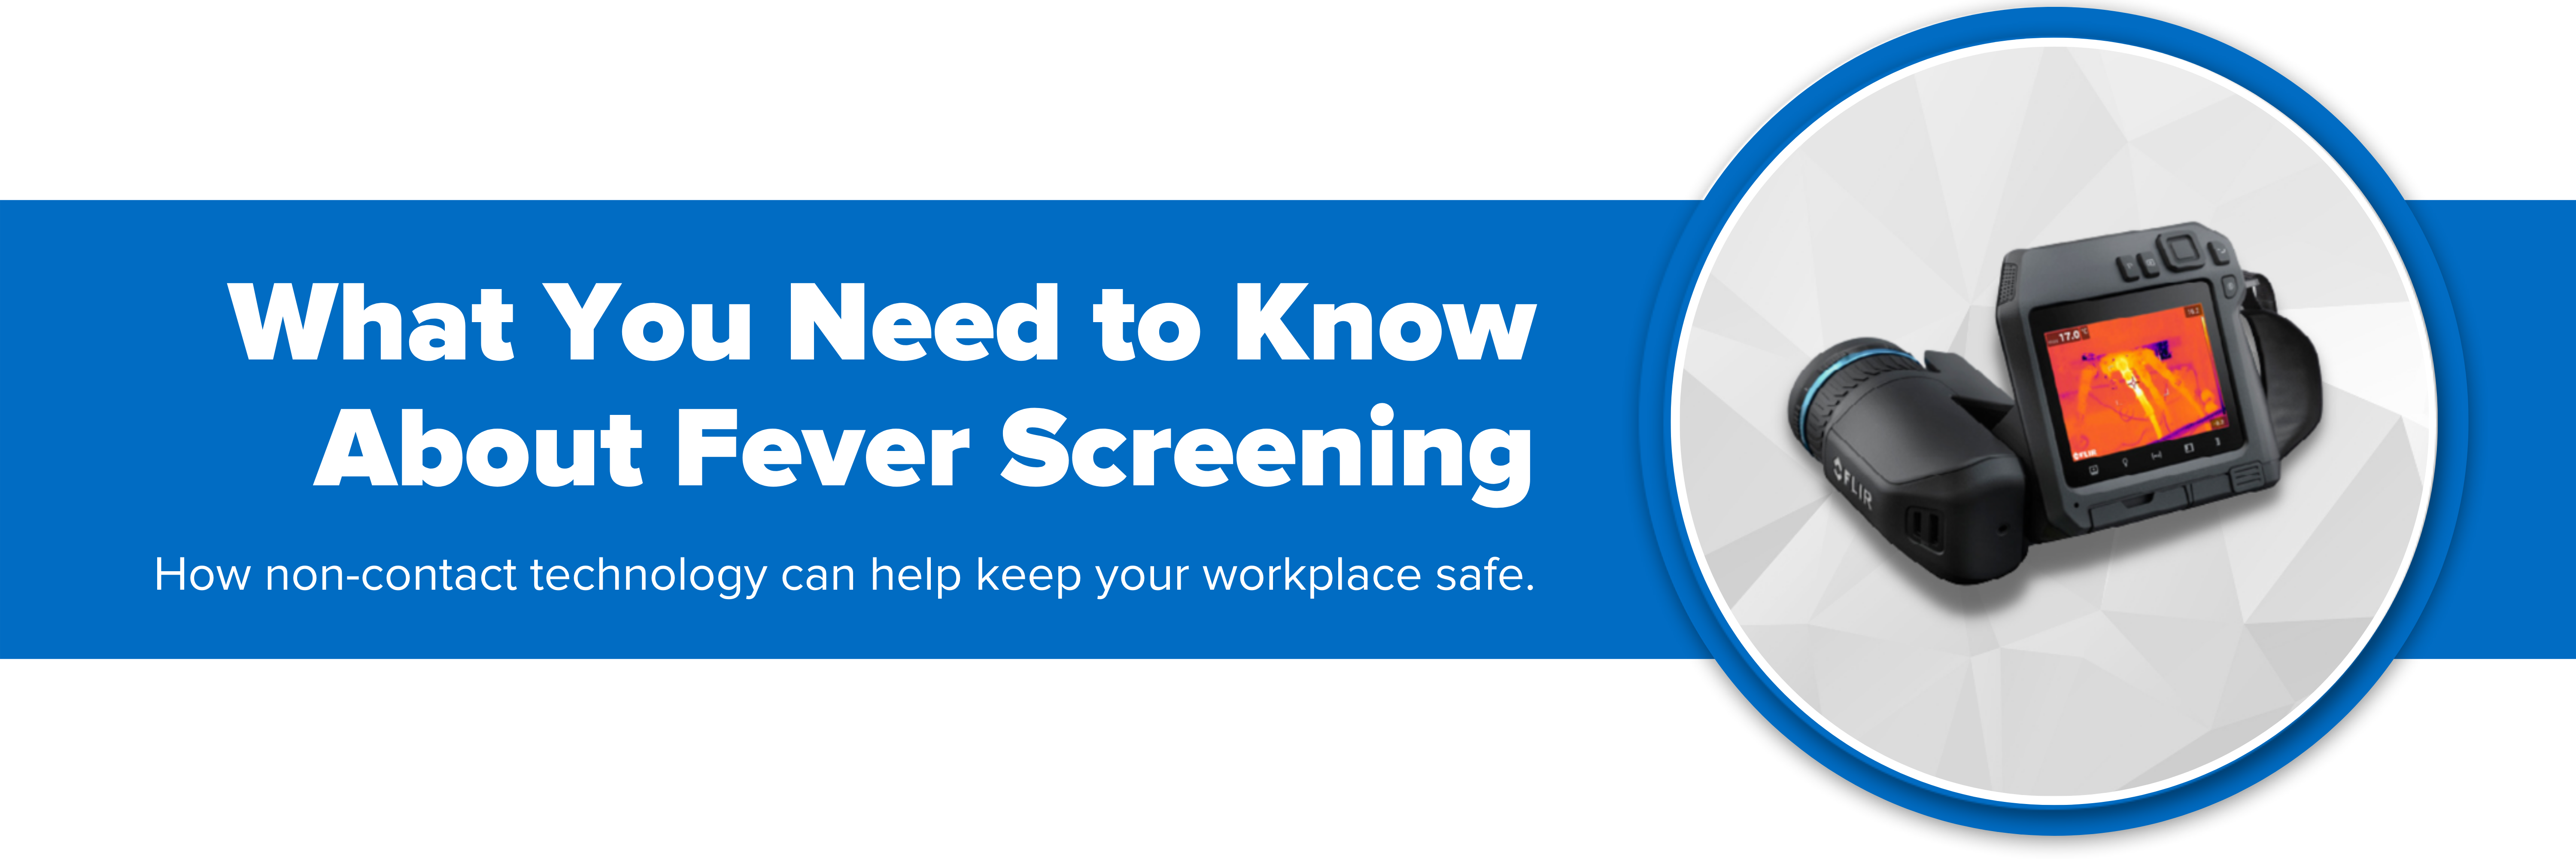 Header image with text "What You Need to Know About Fever Screening"